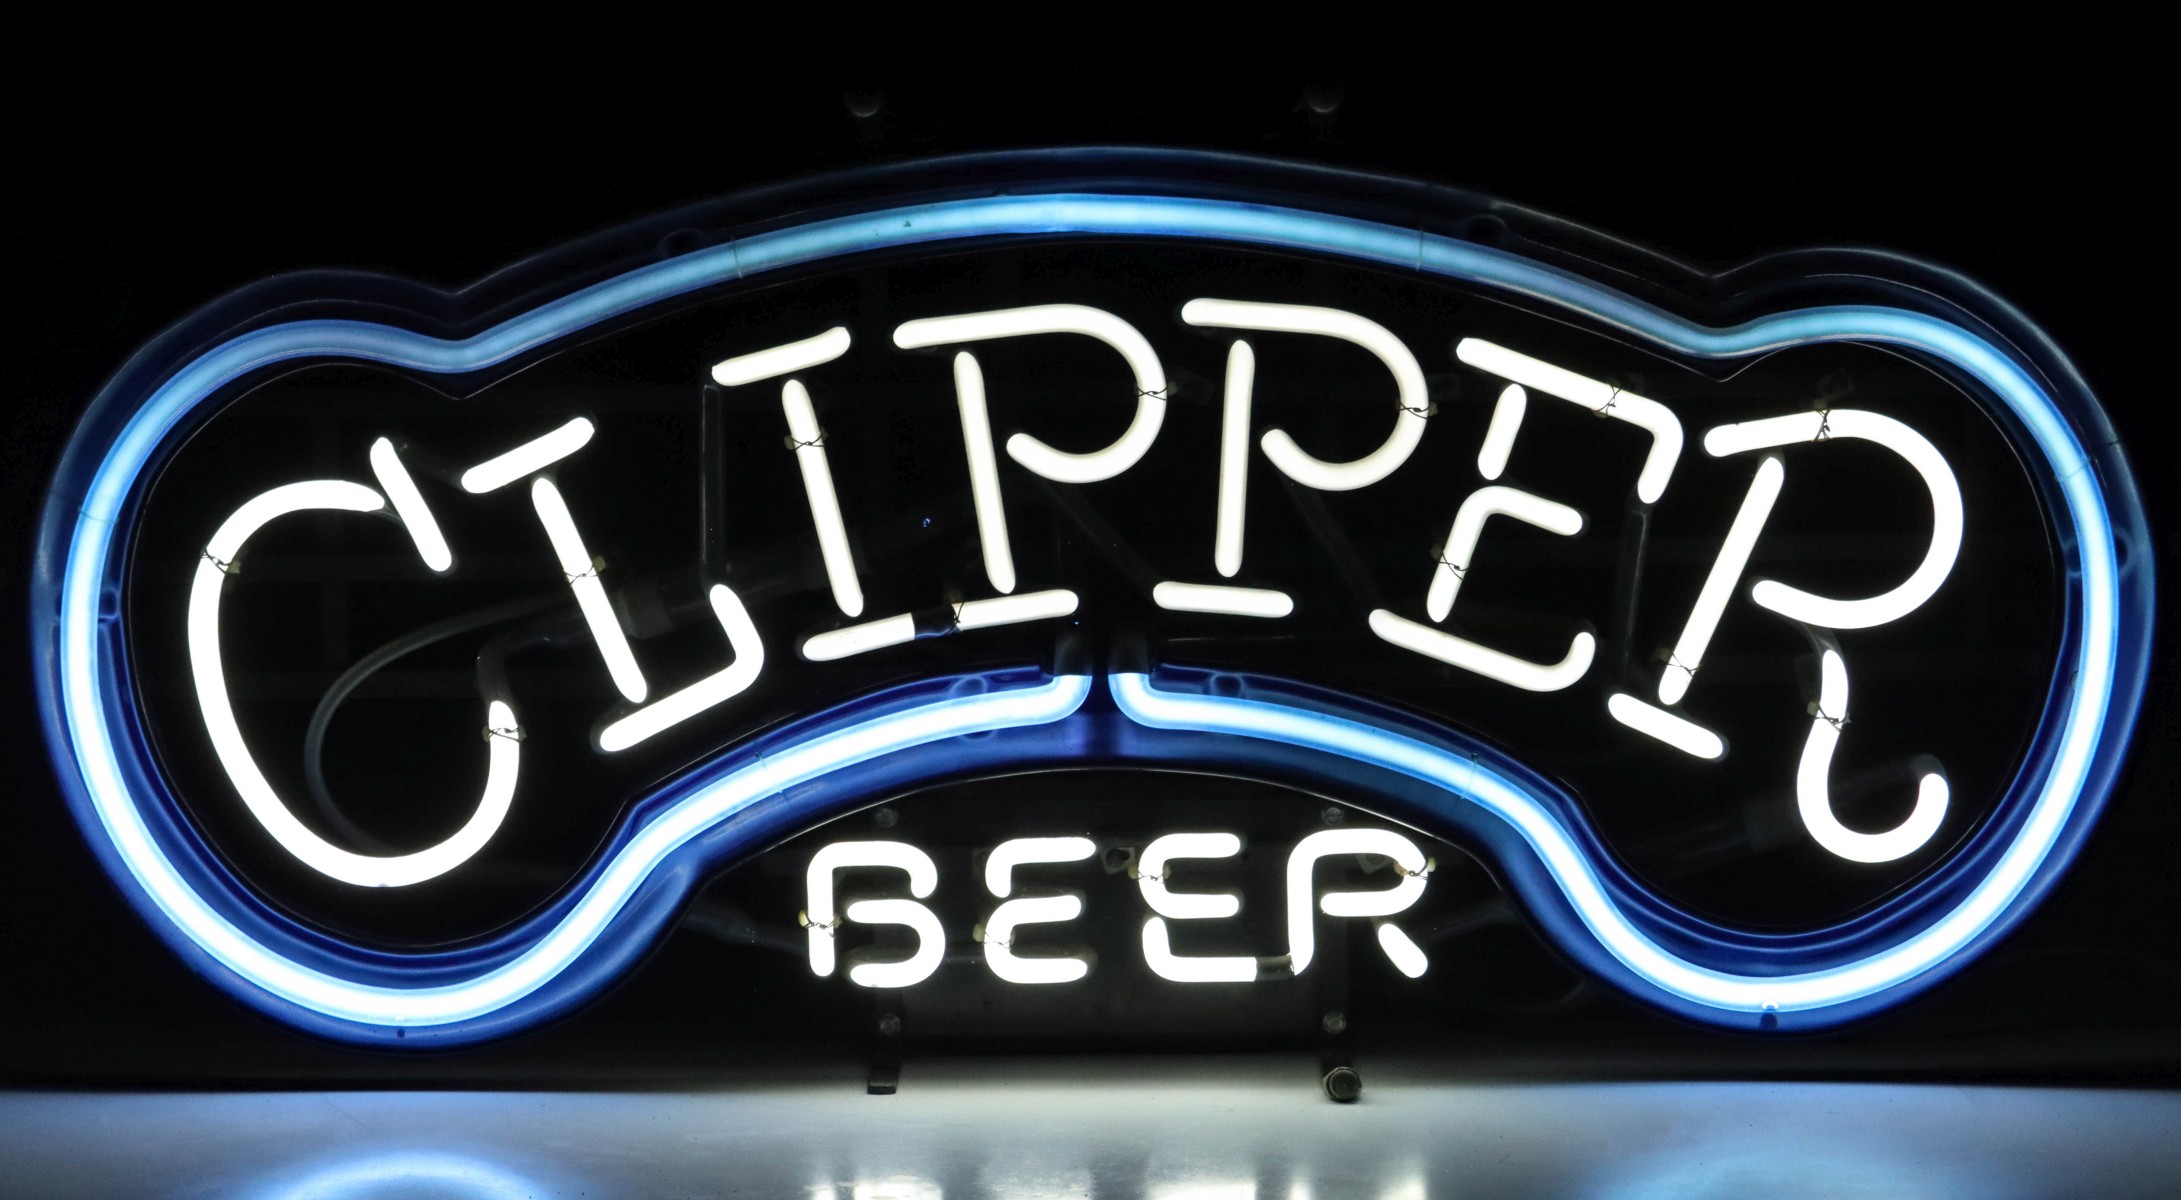 A CLIPPER BEER NEON ADVERTISING SIGN DATED 1983